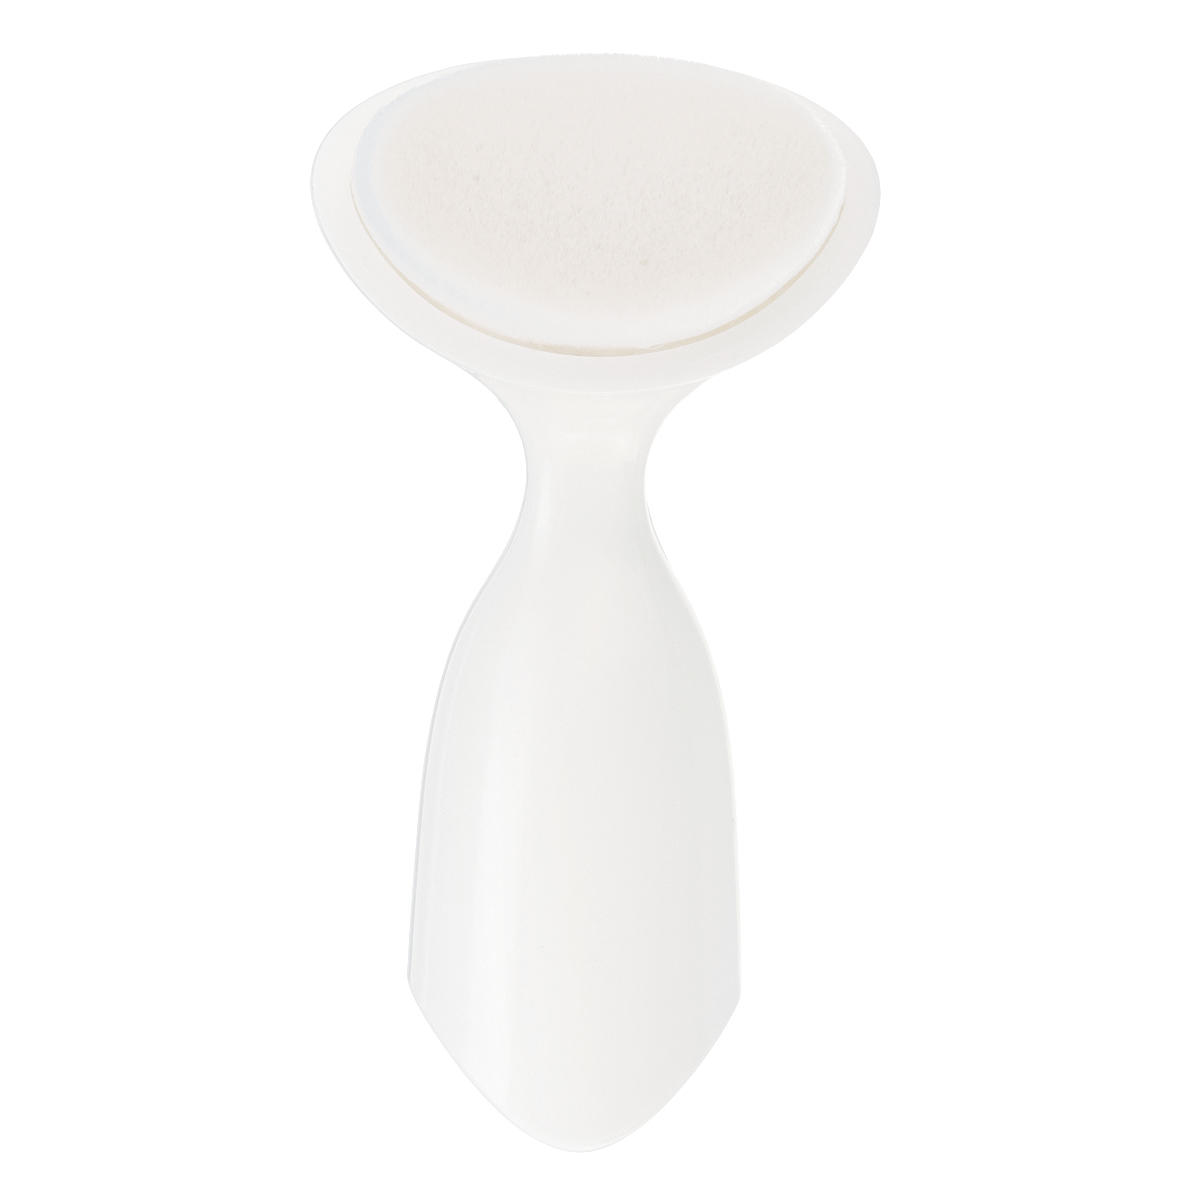 White Facial Cleansing Brush Head for Skinward Face Cleaner